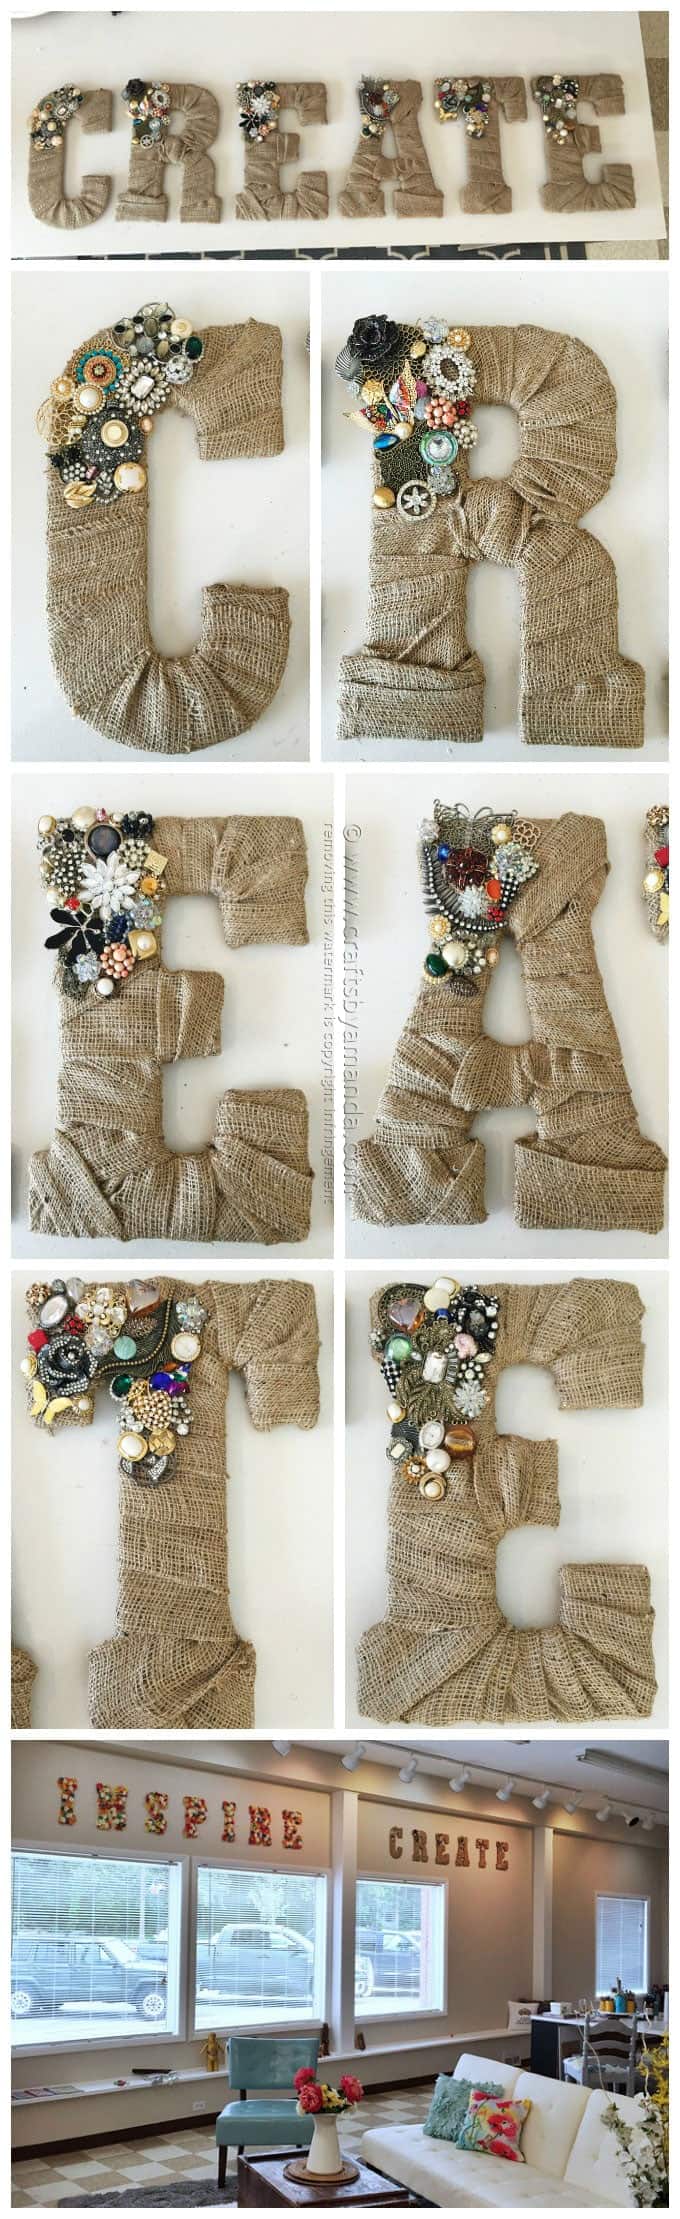 50 Crafts To Make and Sell - Easy DIY Ideas for Cheap Things To Sell on Etsy, Online and for Craft Fairs. Make Money with These Homemade Crafts for Teens, Kids, Christmas, Summer, Mother’s Day Gifts. | Vintage Jewel Burlap Wall Letters #crafts #diy